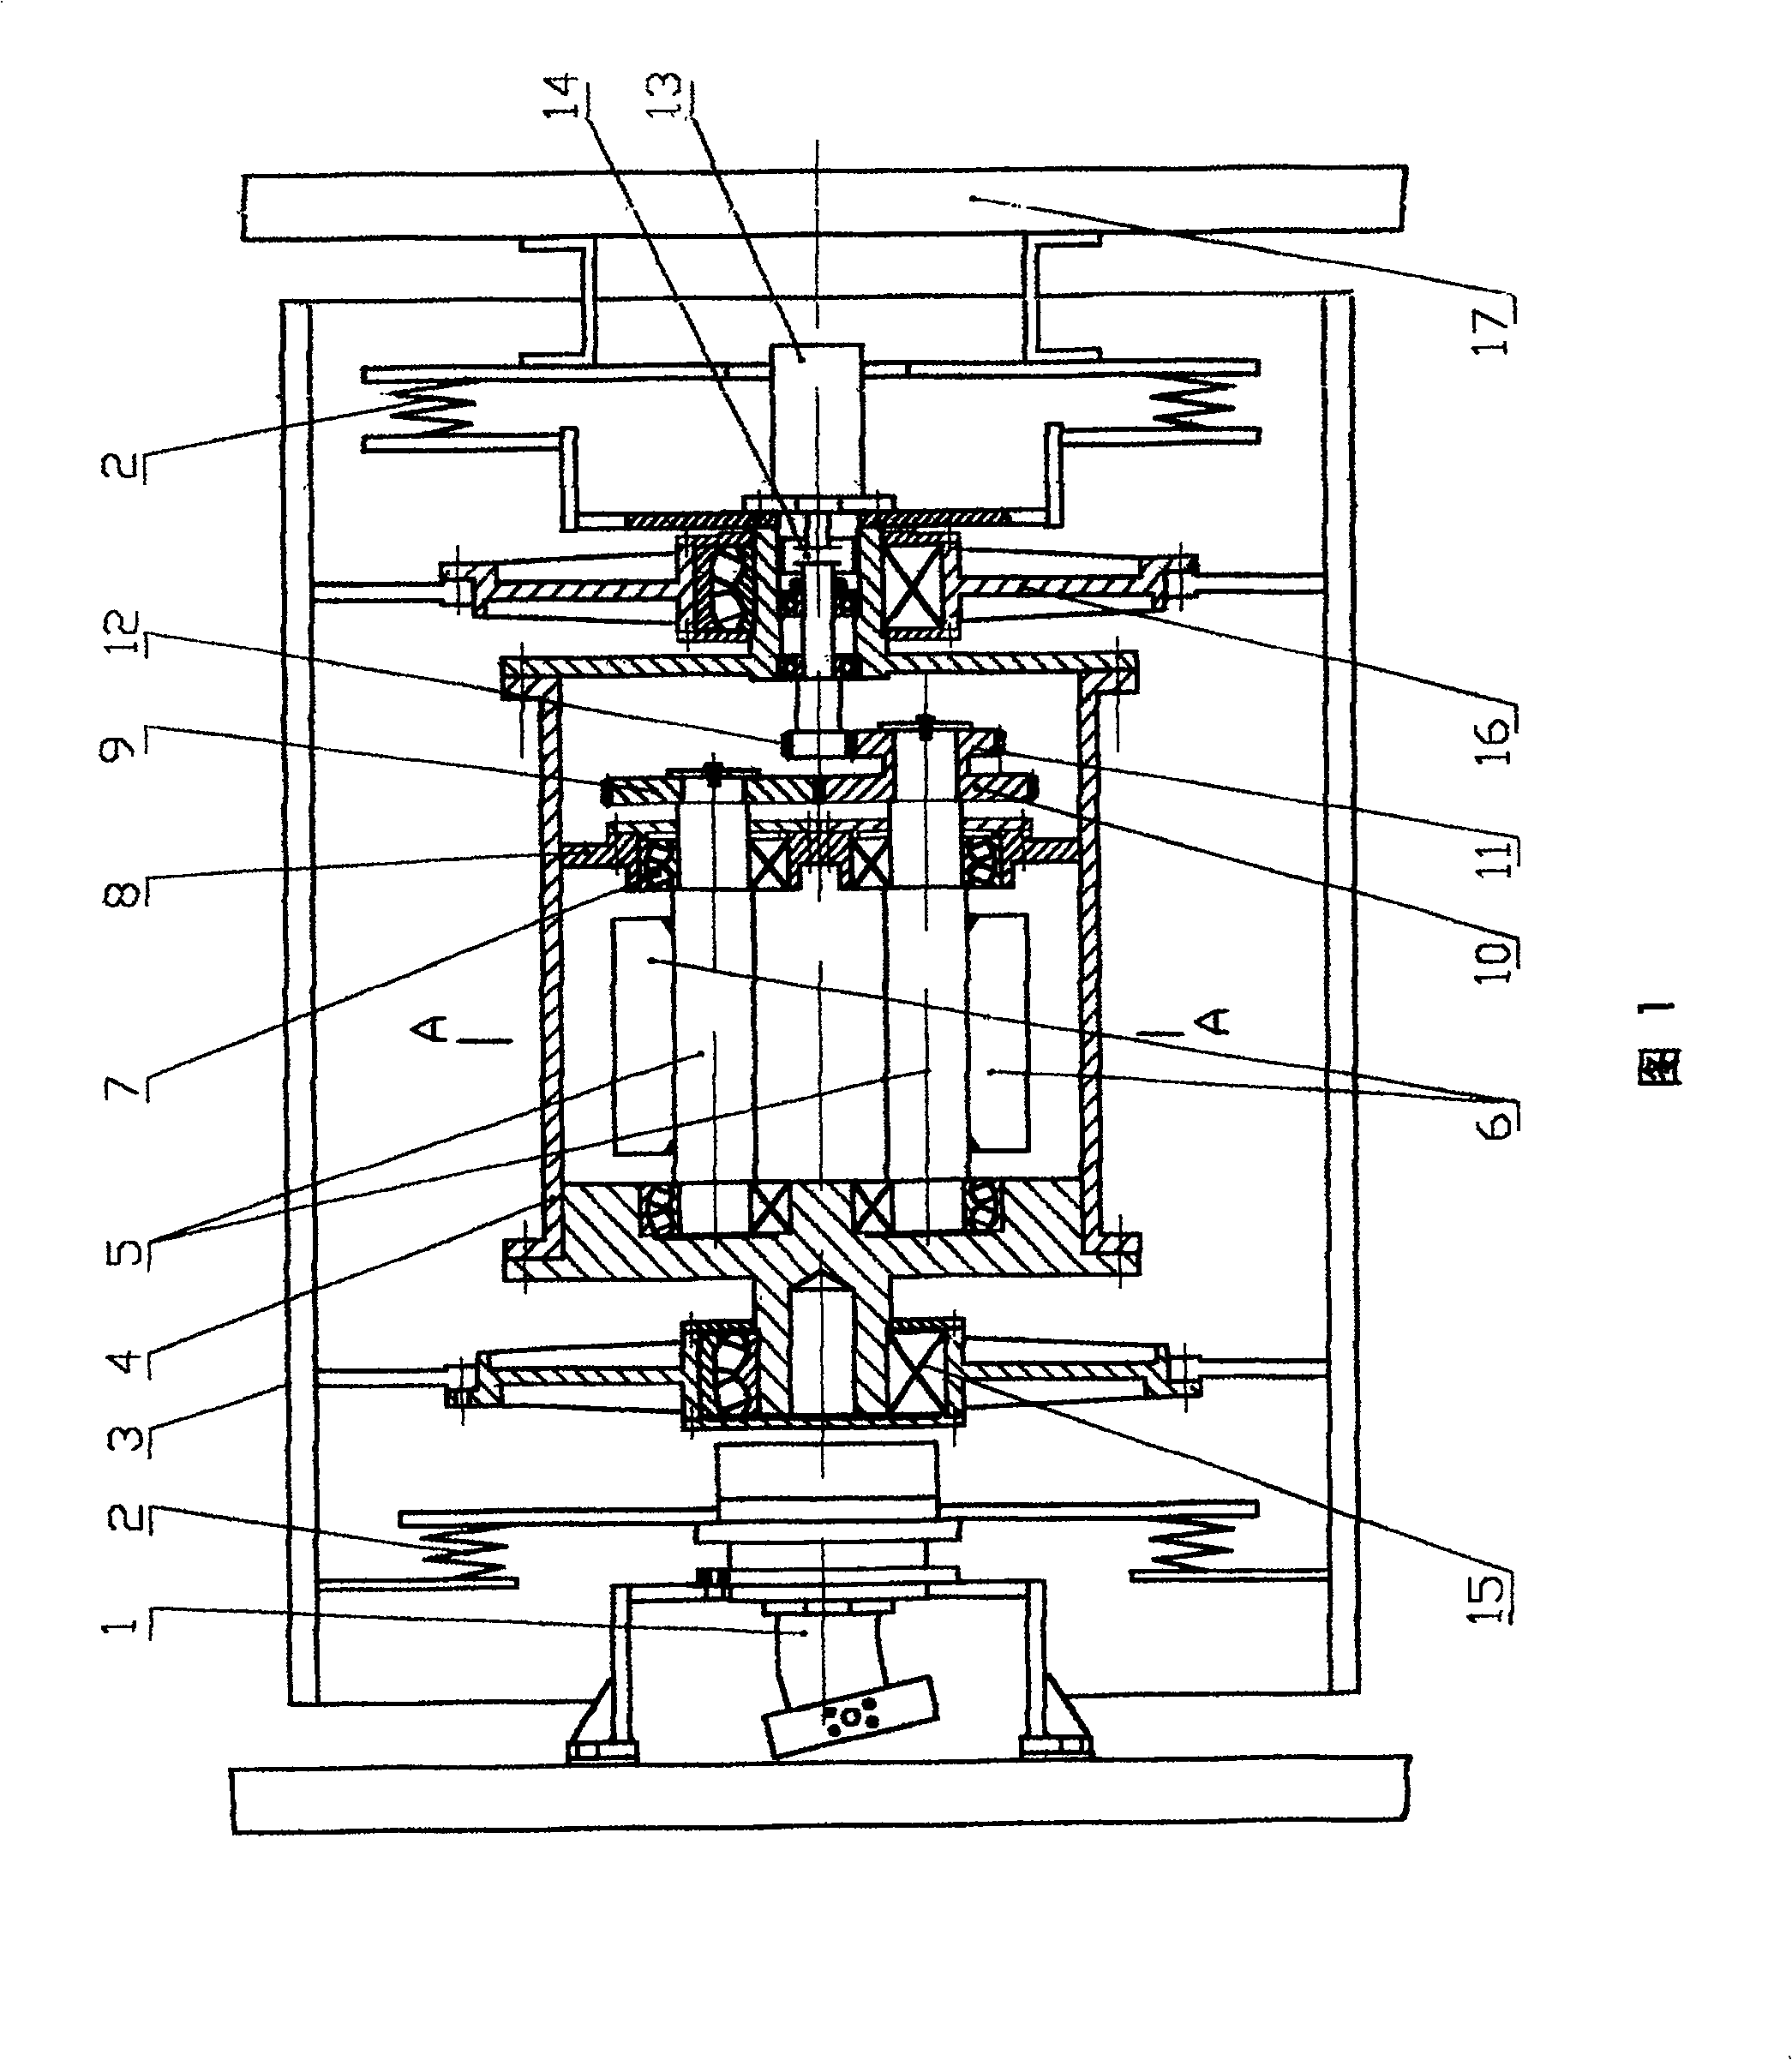 Synchronous drive method for parallel installation of multiple eccentric shafts